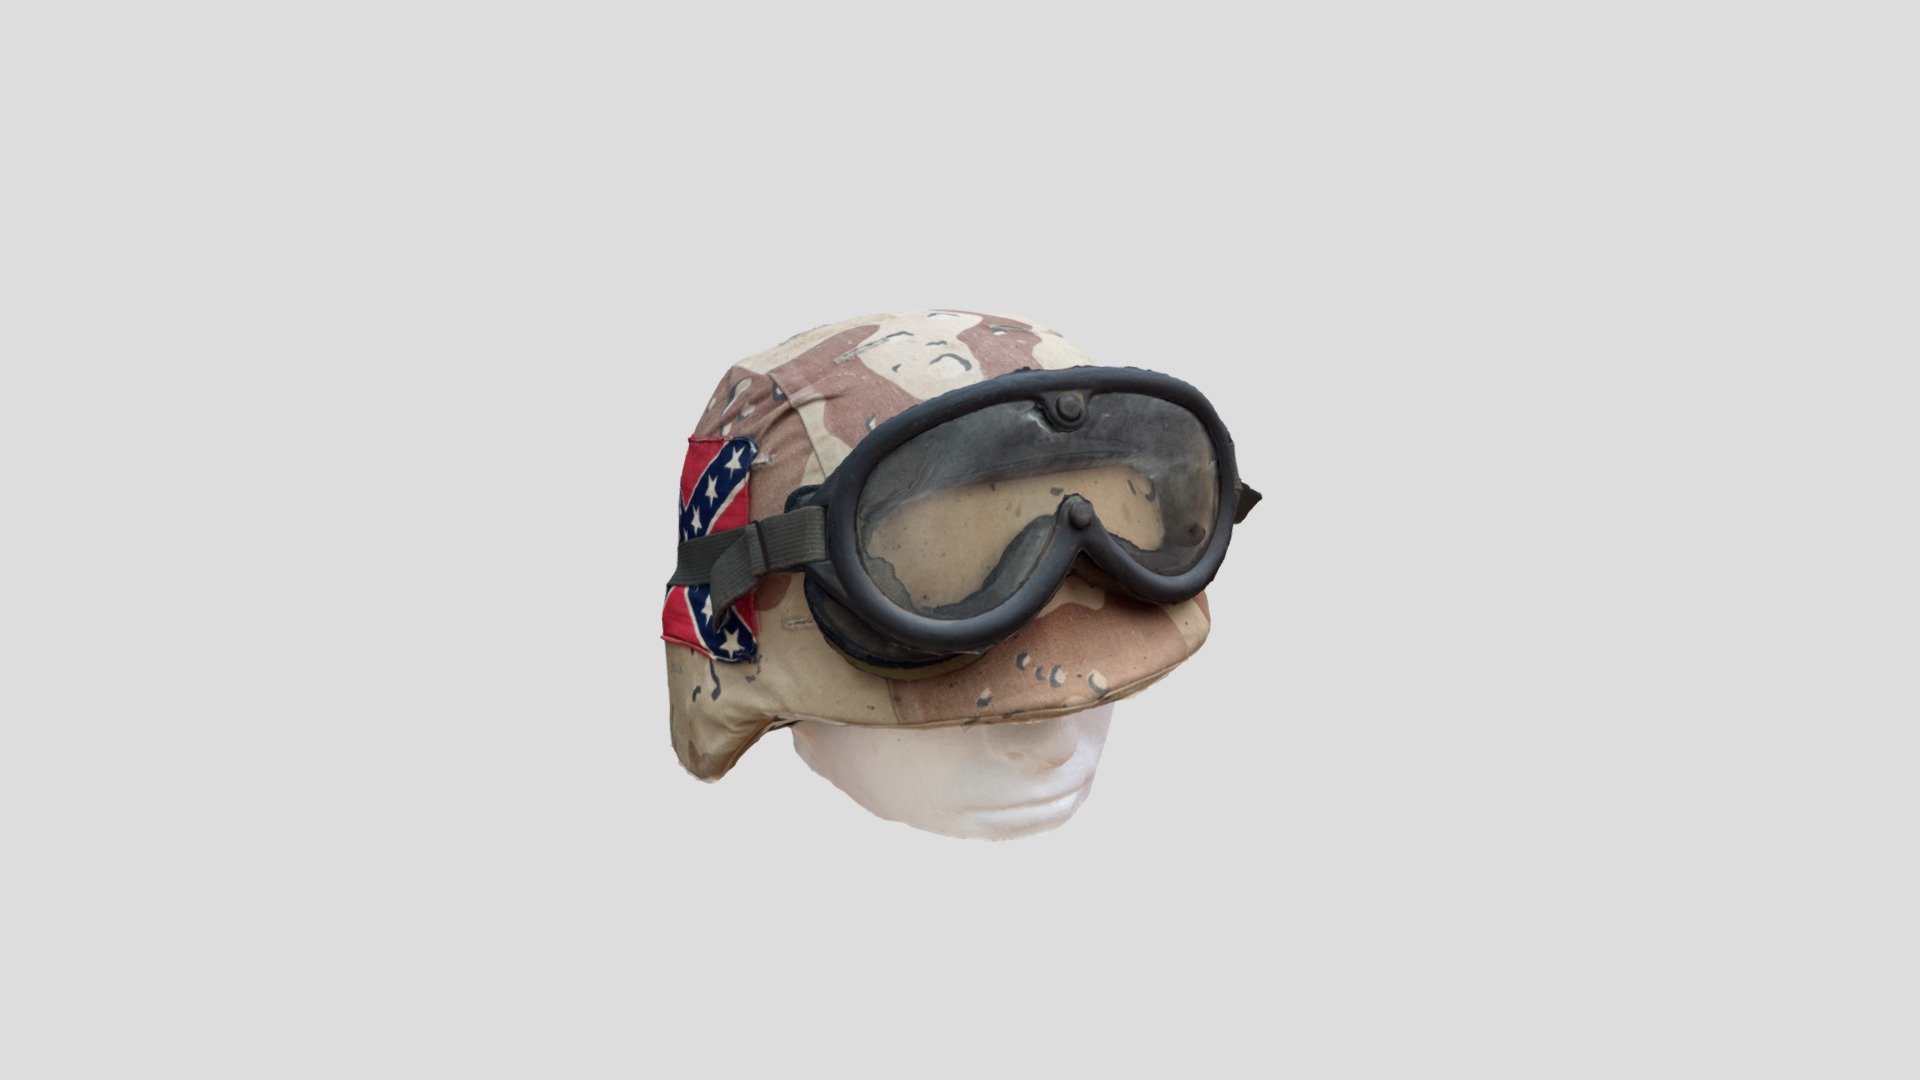 Learning Realityscan on some helmets, hopefully will improve my technique in the future. Perhaps I will offer model packs some day? - Desert Storm PASGT Helmet Test Scan - Download Free 3D model by DotMatrixMan 3d model